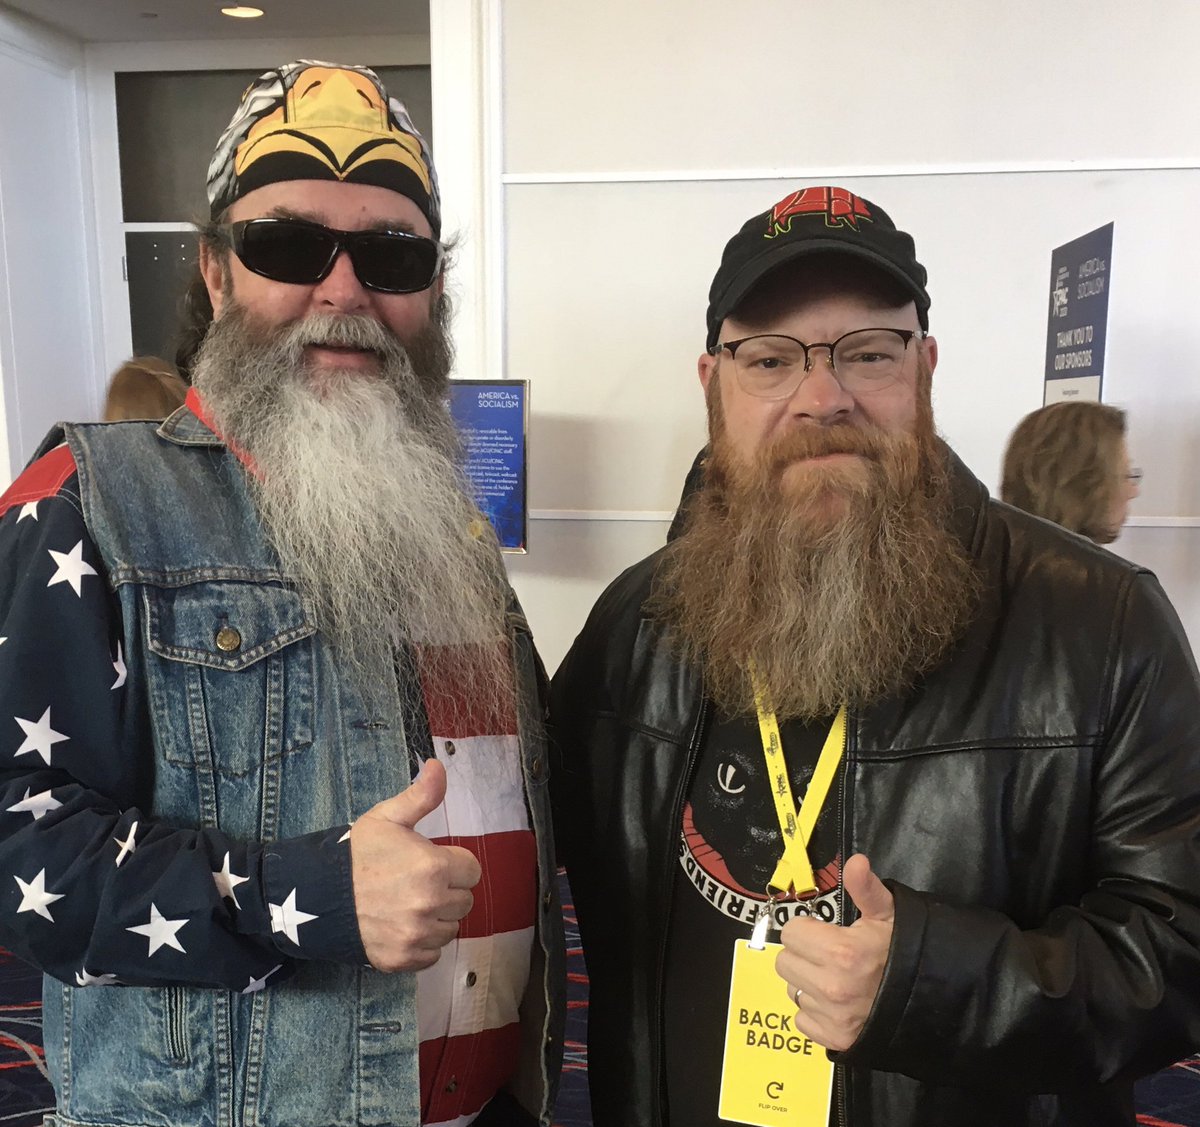 @Mark_McEathron Most of my new follows are due to my good looks. #JustSayin 🤣 
#GrizzlyArchive w/ @CamEdwards @CPAC  #BeardBros👊🇺🇸